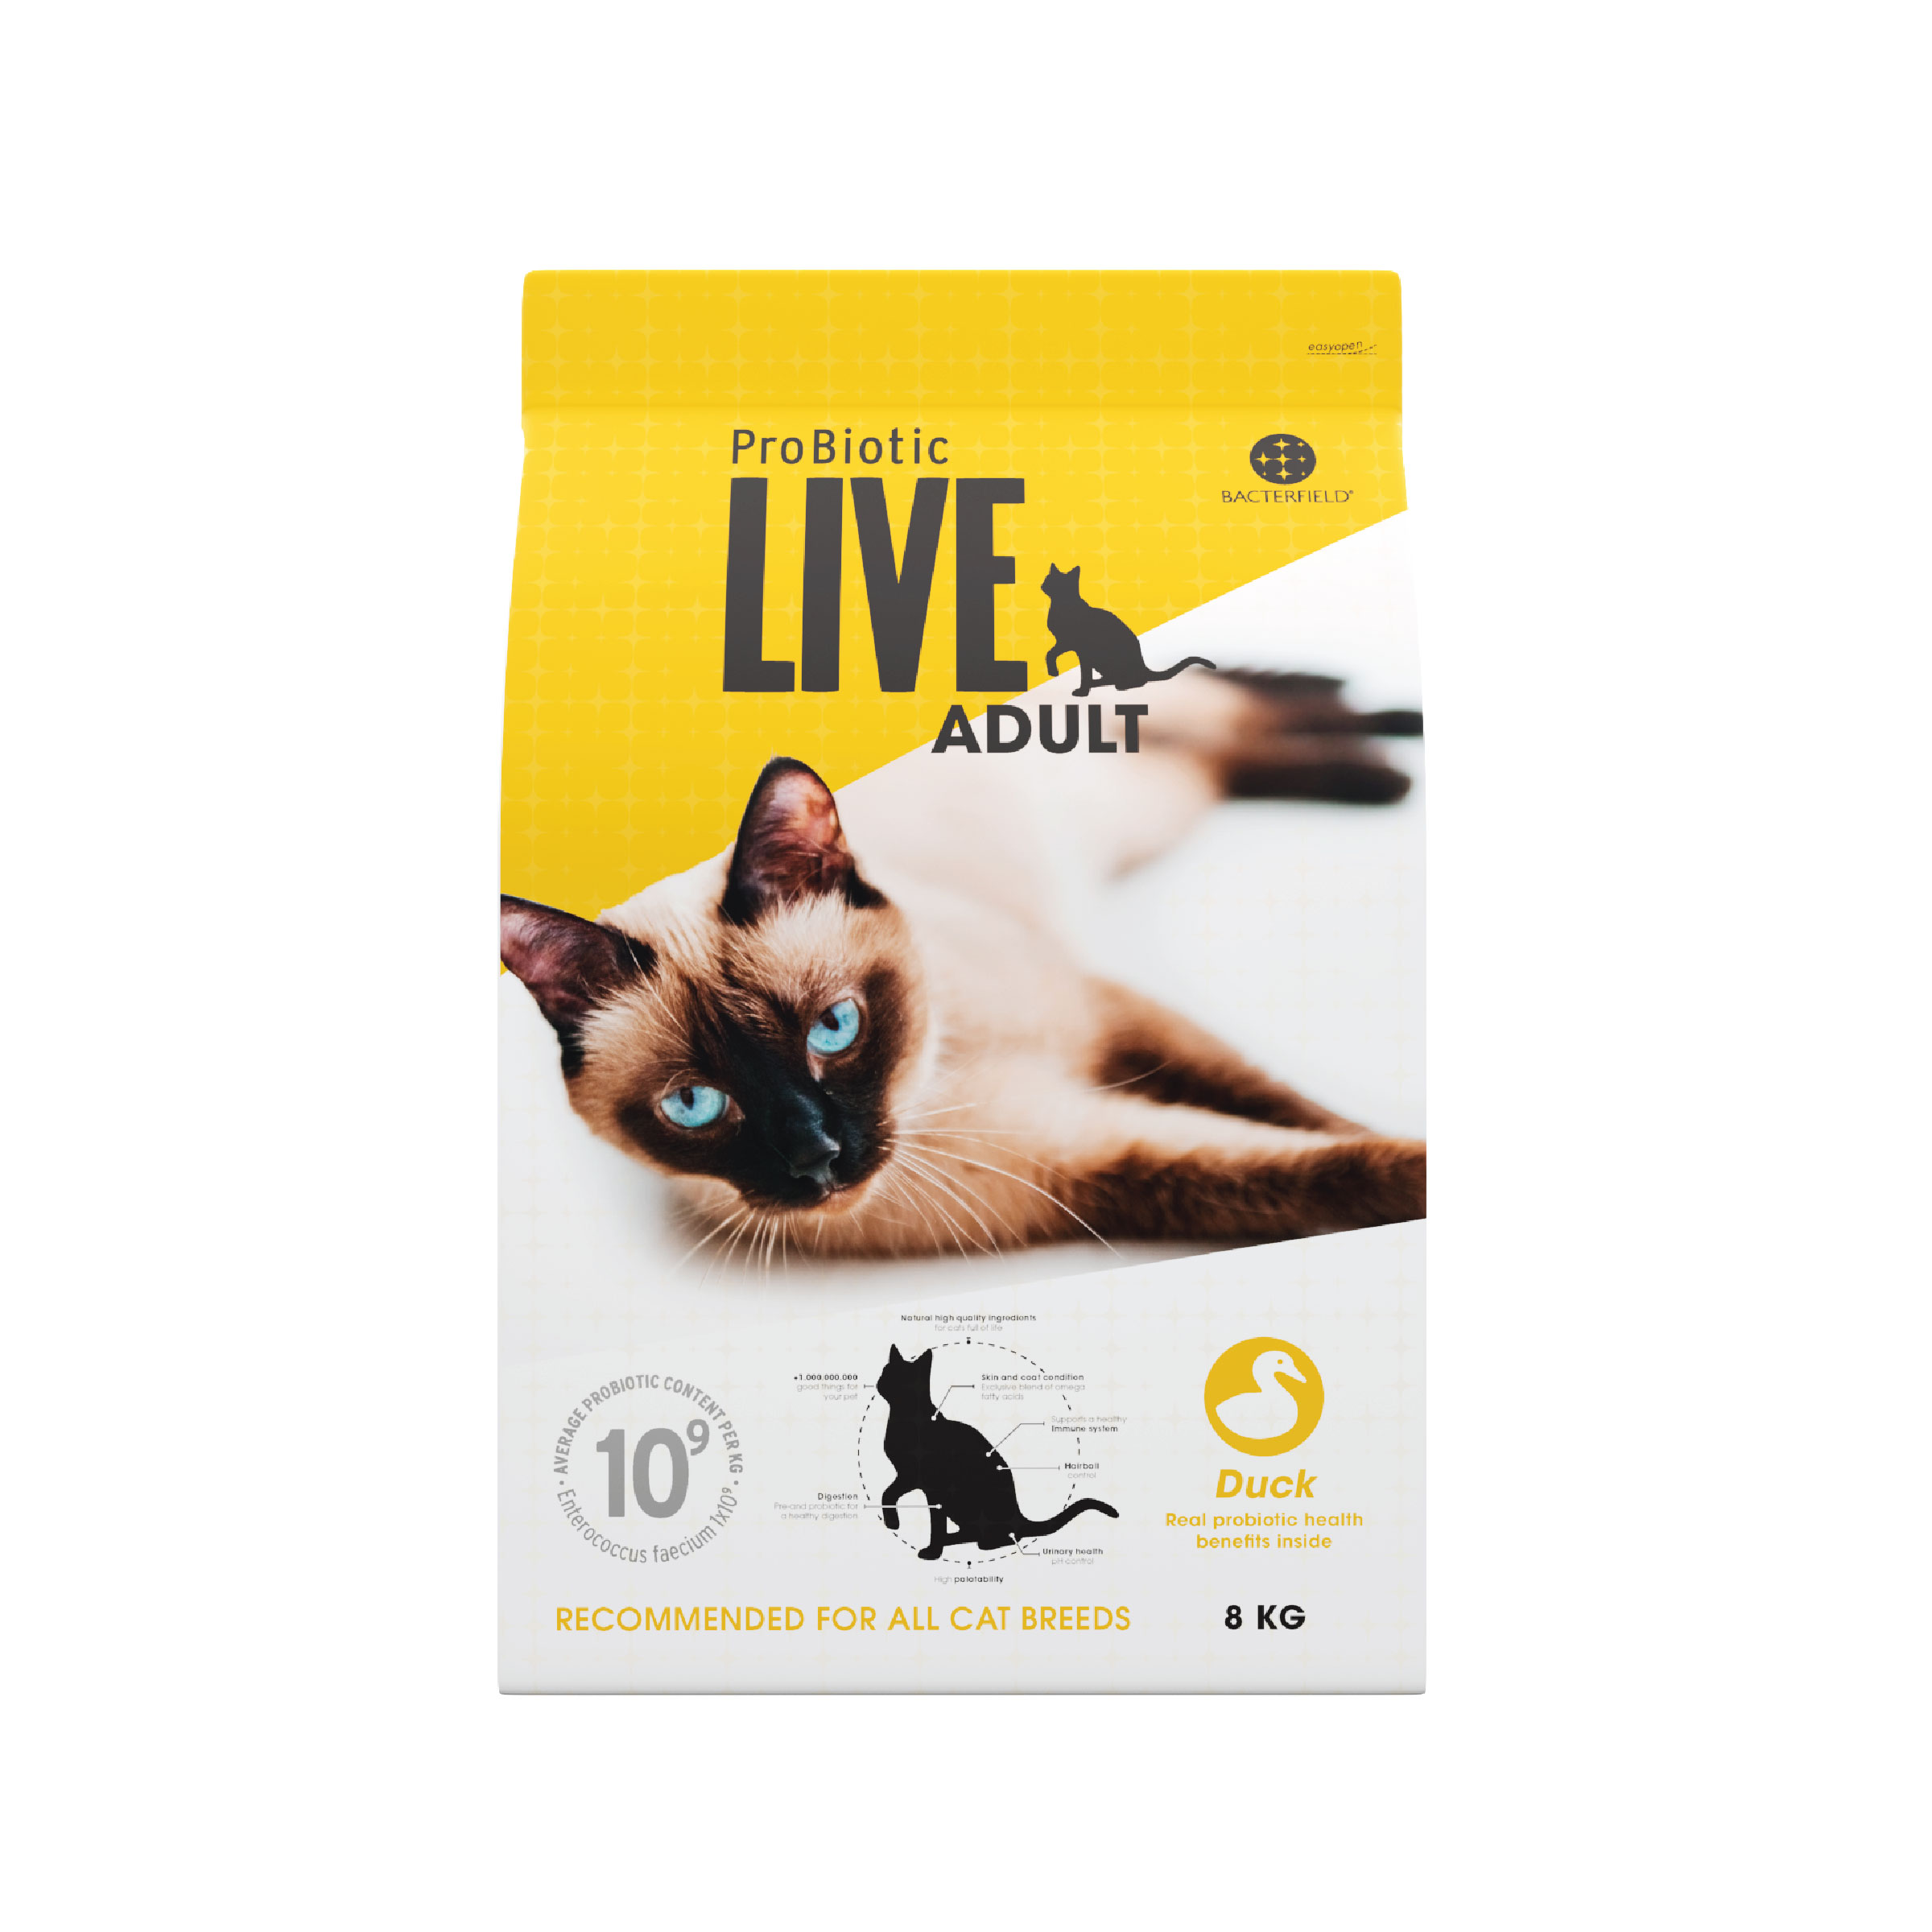 Probiotic Live Cat Food For Adult With Duck